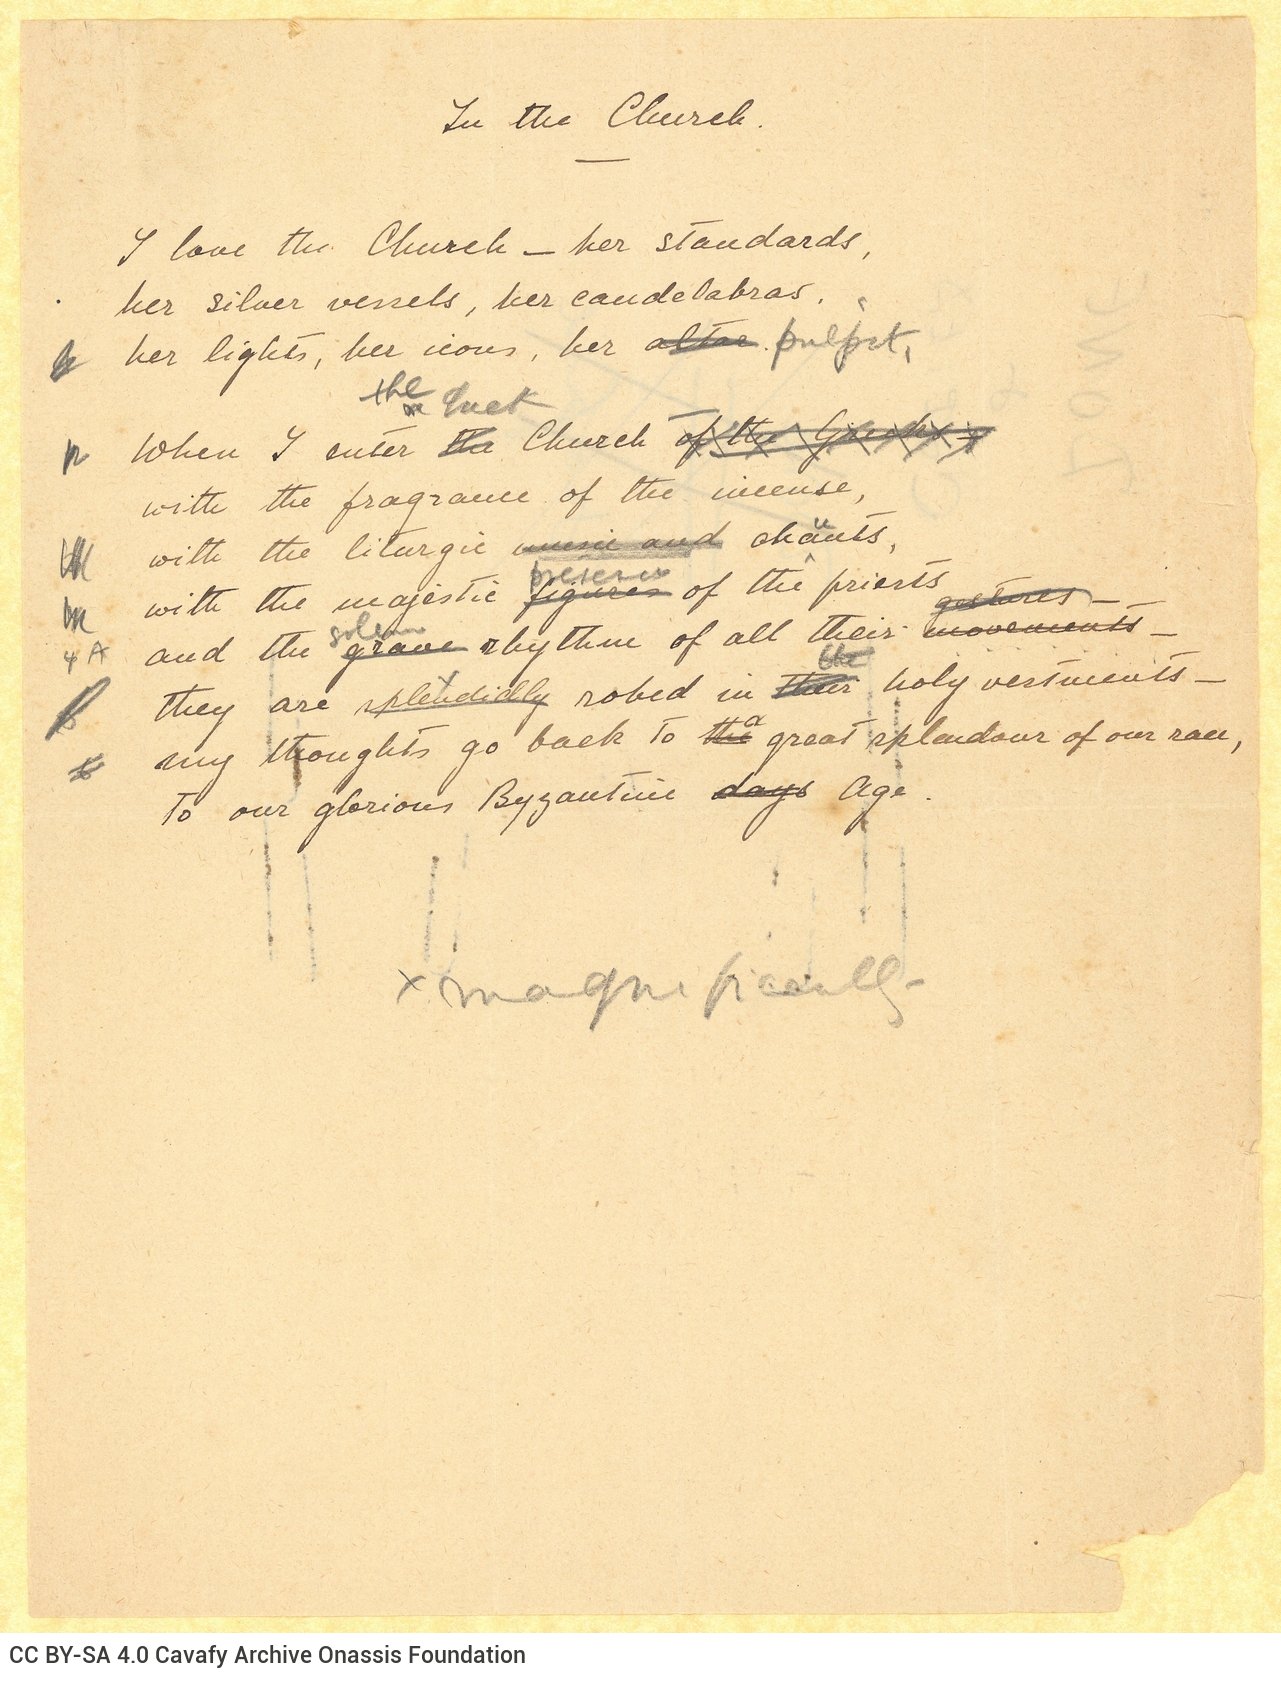 Handwritten English translation of the poem "In the Church" by G. Valassopoulo on one side of a sheet. Handwritten cancell